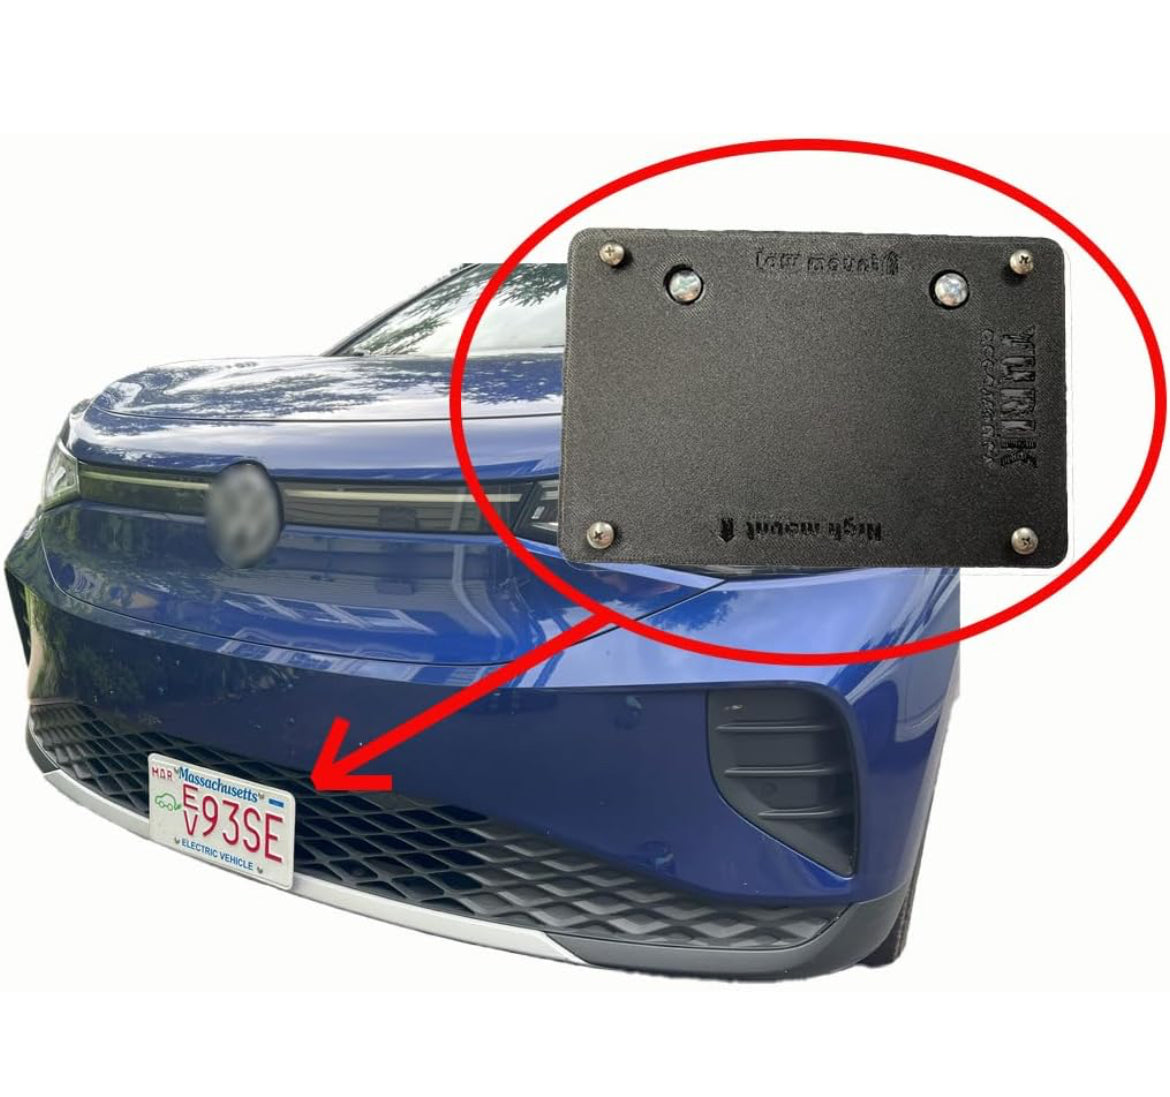 No drill front license mounts?